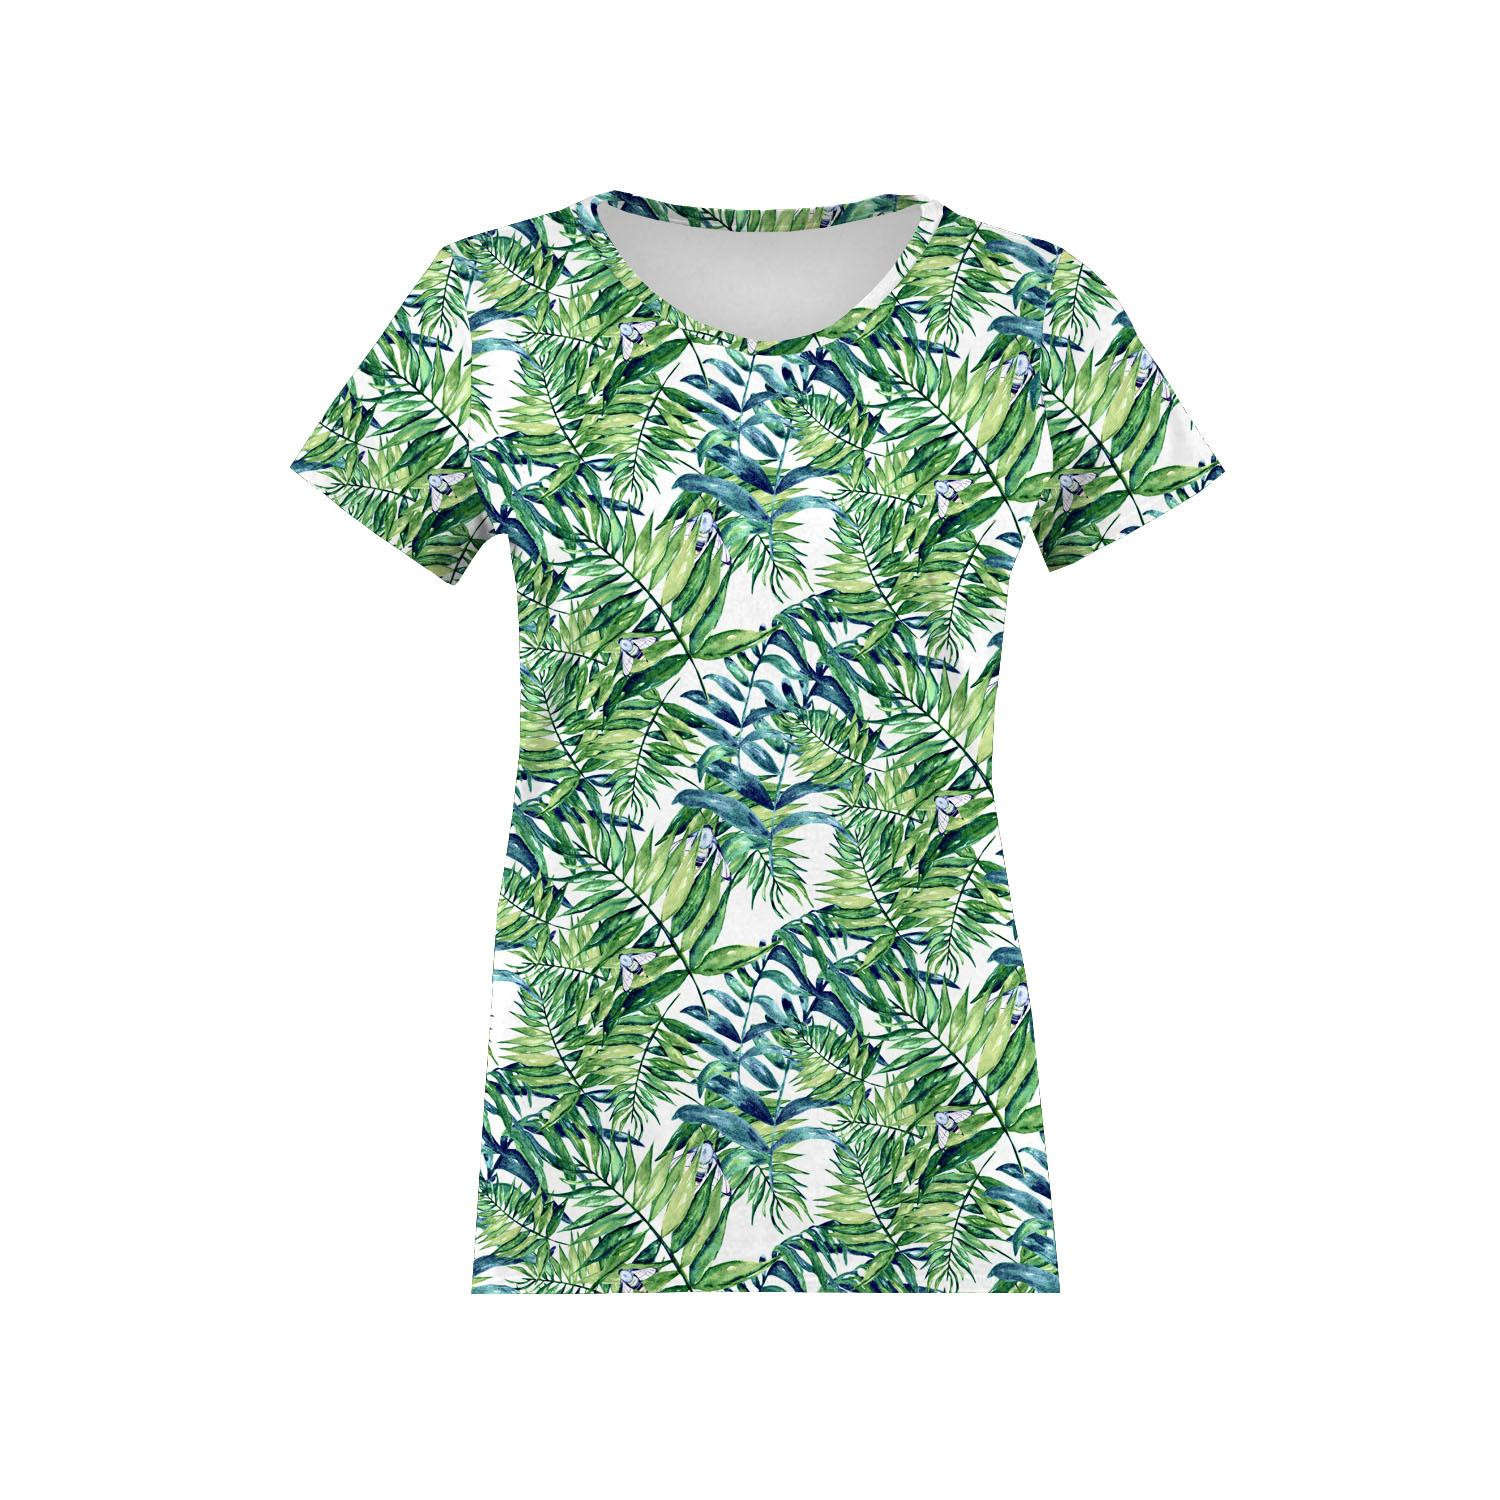 WOMEN’S T-SHIRT - MINI LEAVES AND INSECTS PAT. 6 (TROPICAL NATURE) / white - single jersey